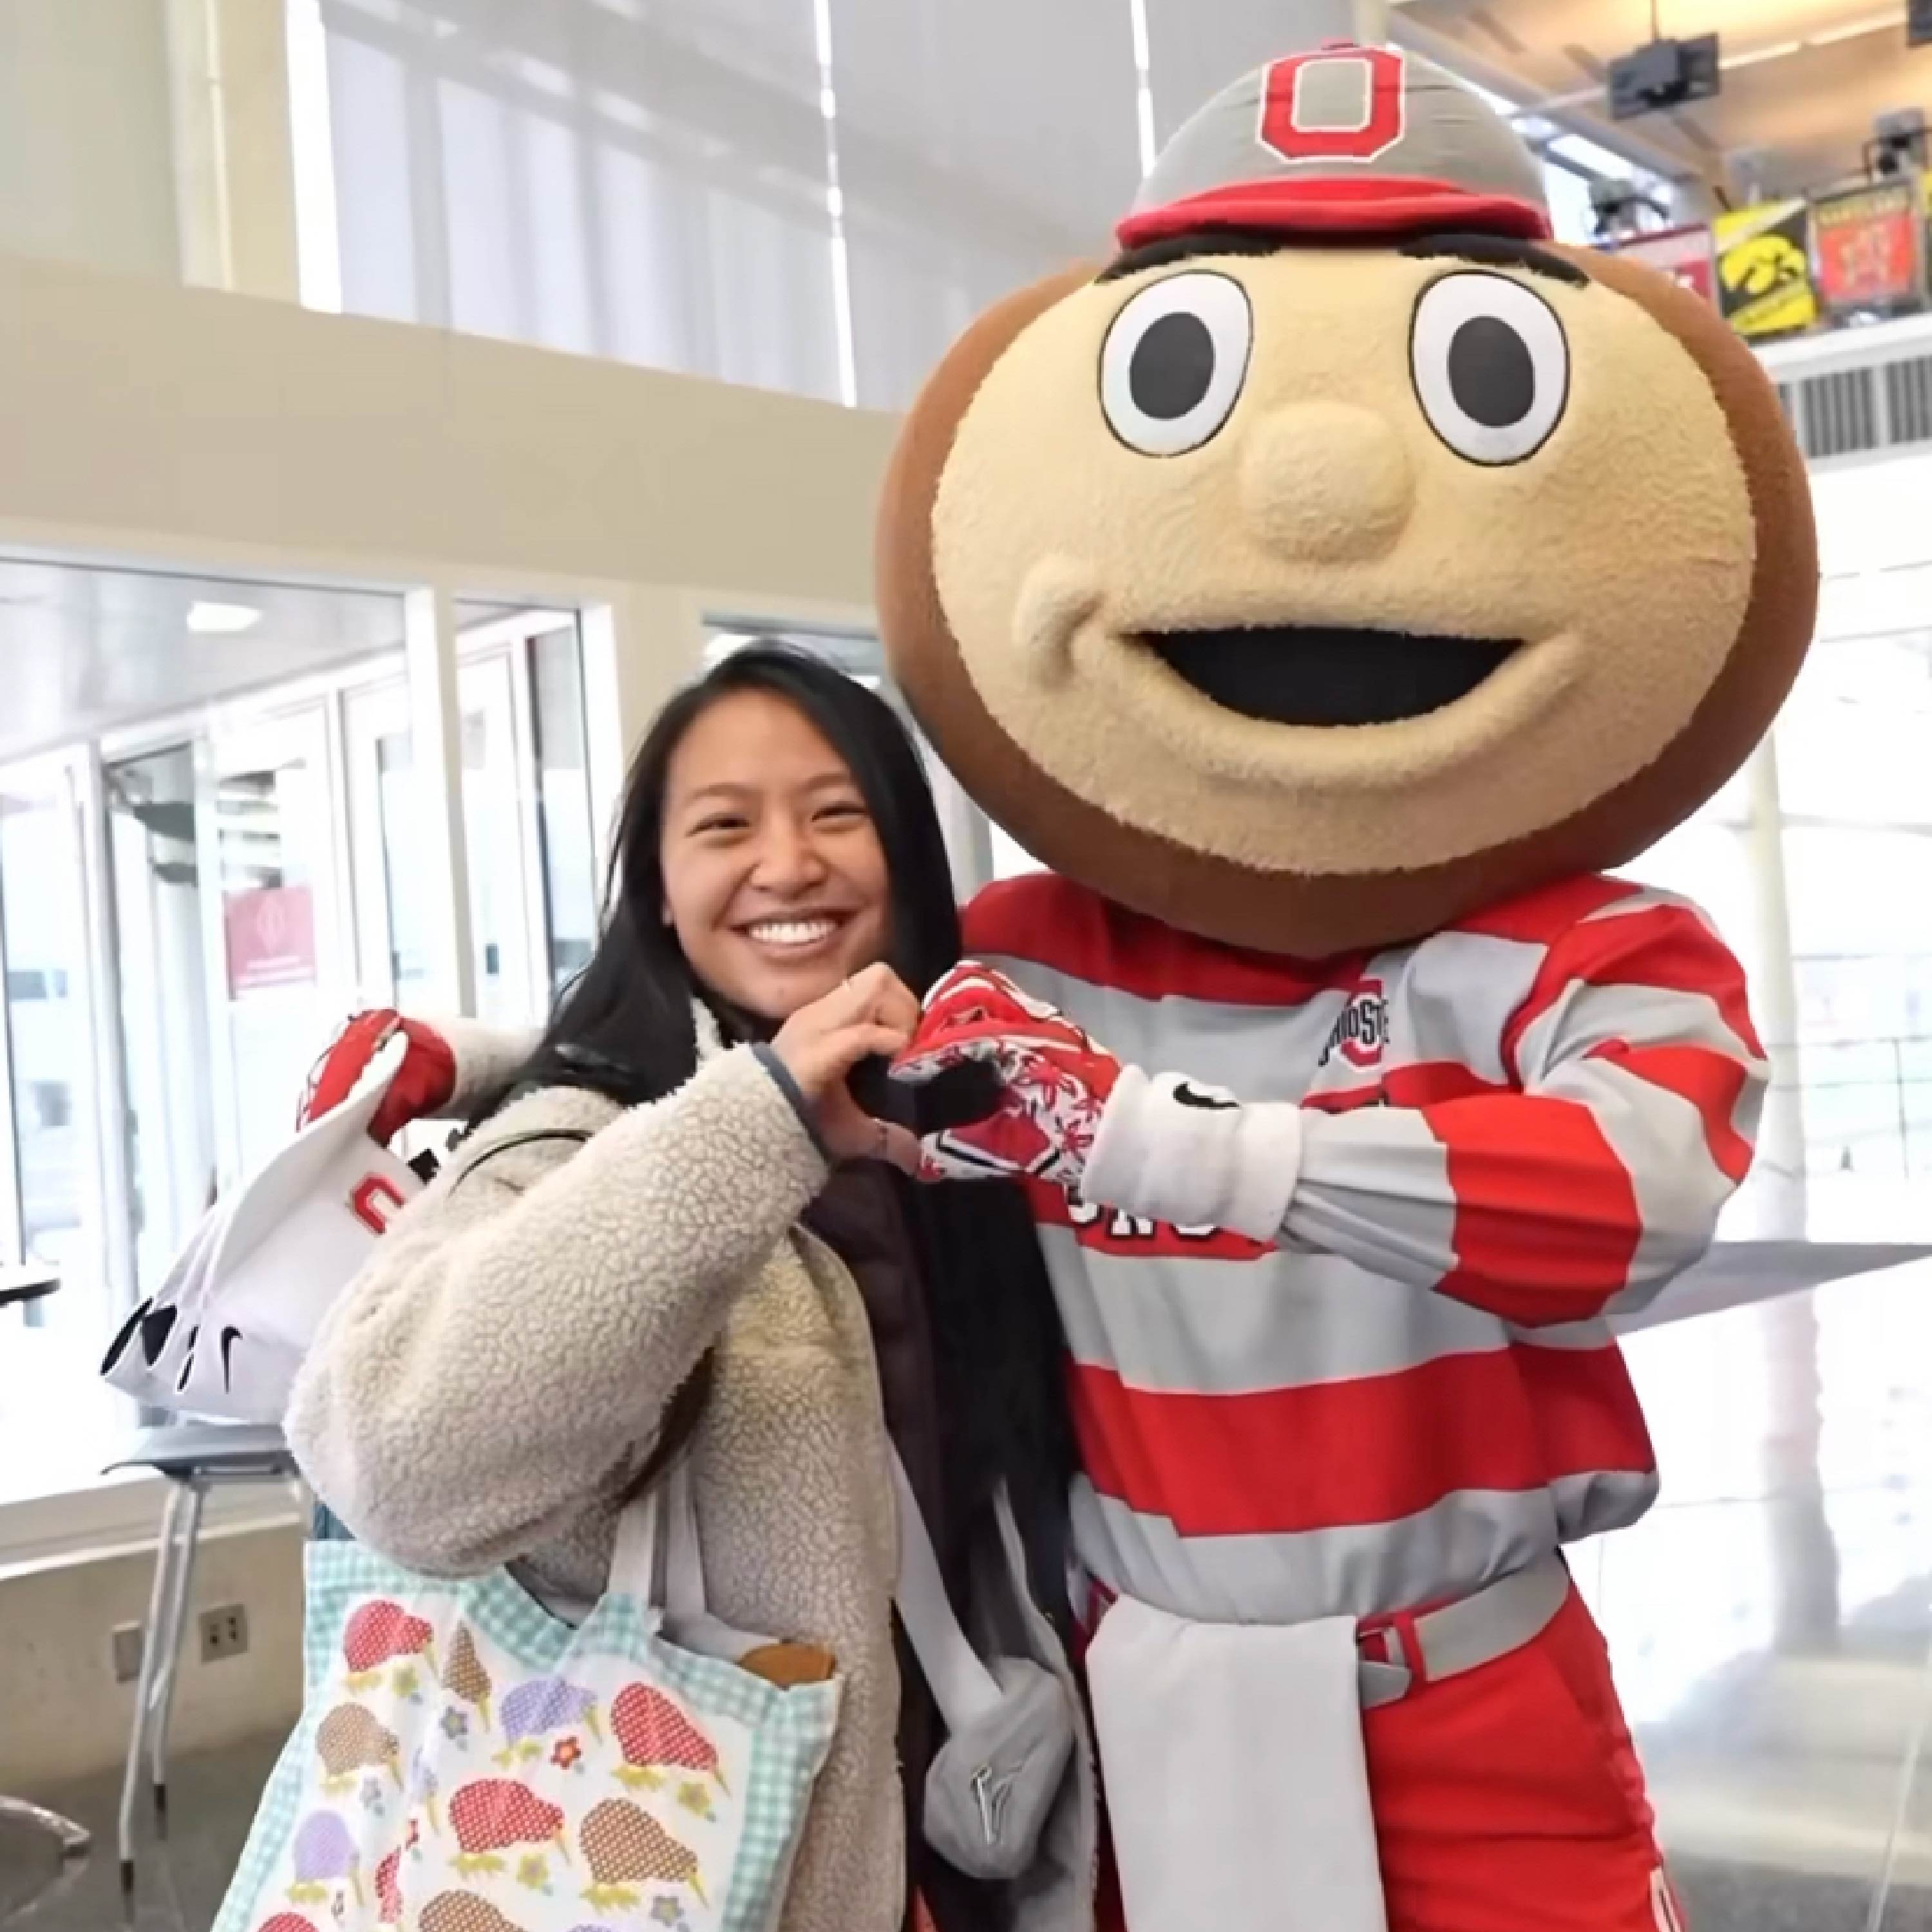 Brutus Buckeye and a friend join hands to make the "heart" symbol.